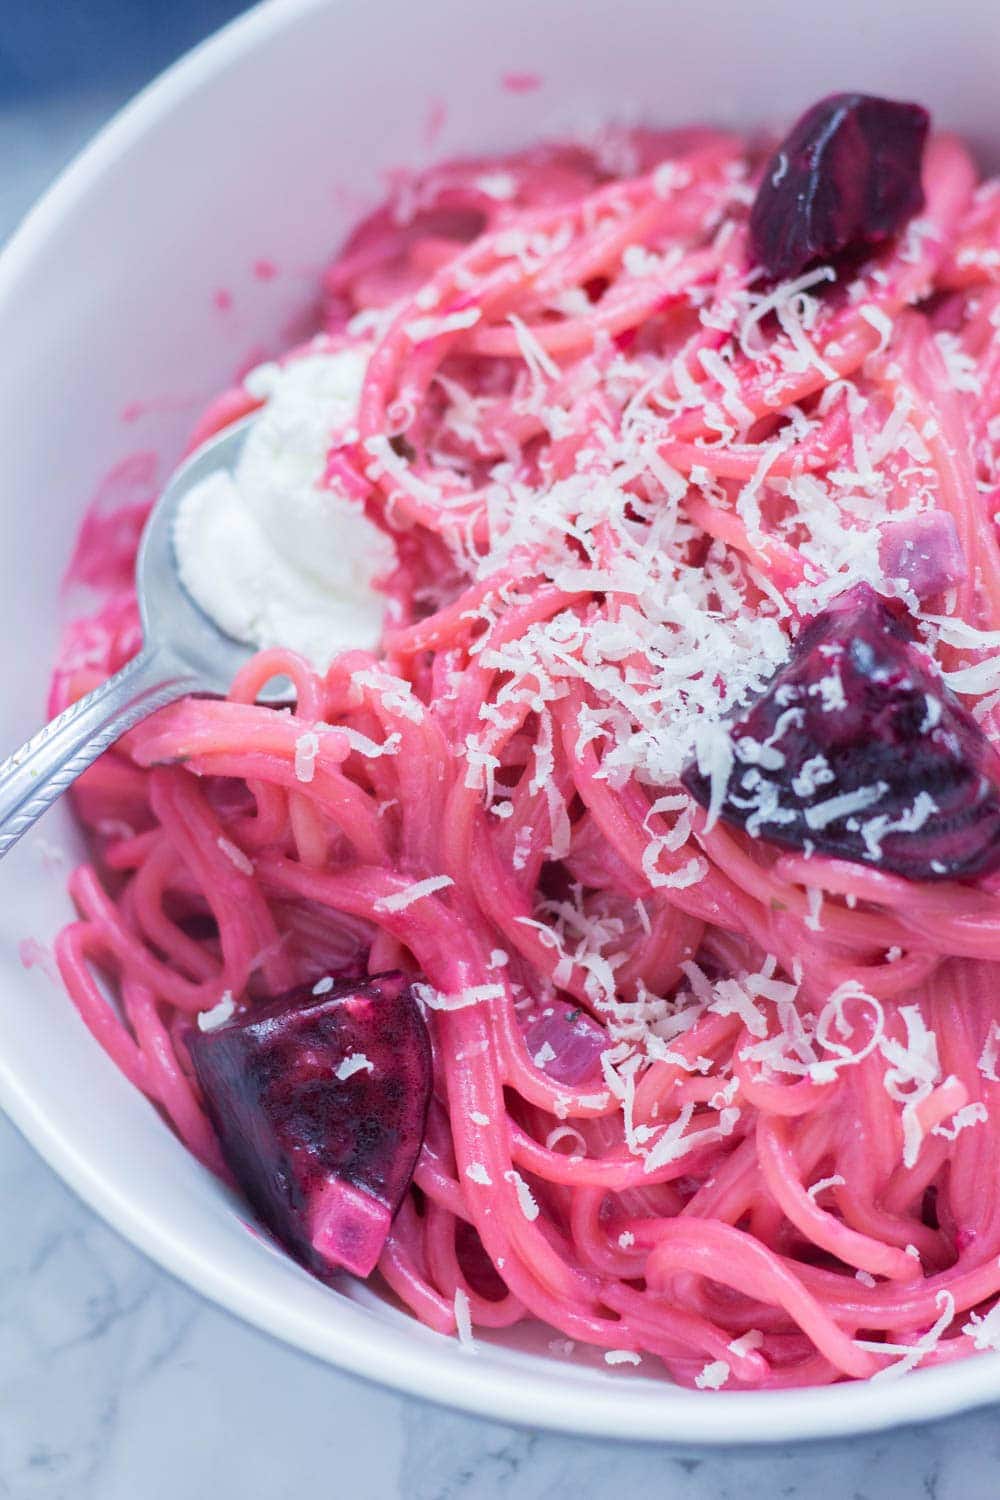 This roasted beetroot one-pot pasta is finished with a spoonful of goat's cheese. It's so easy and looks amazing, this dish is perfect comfort food! #beetroot #pasta #vegetarian #comfortfood